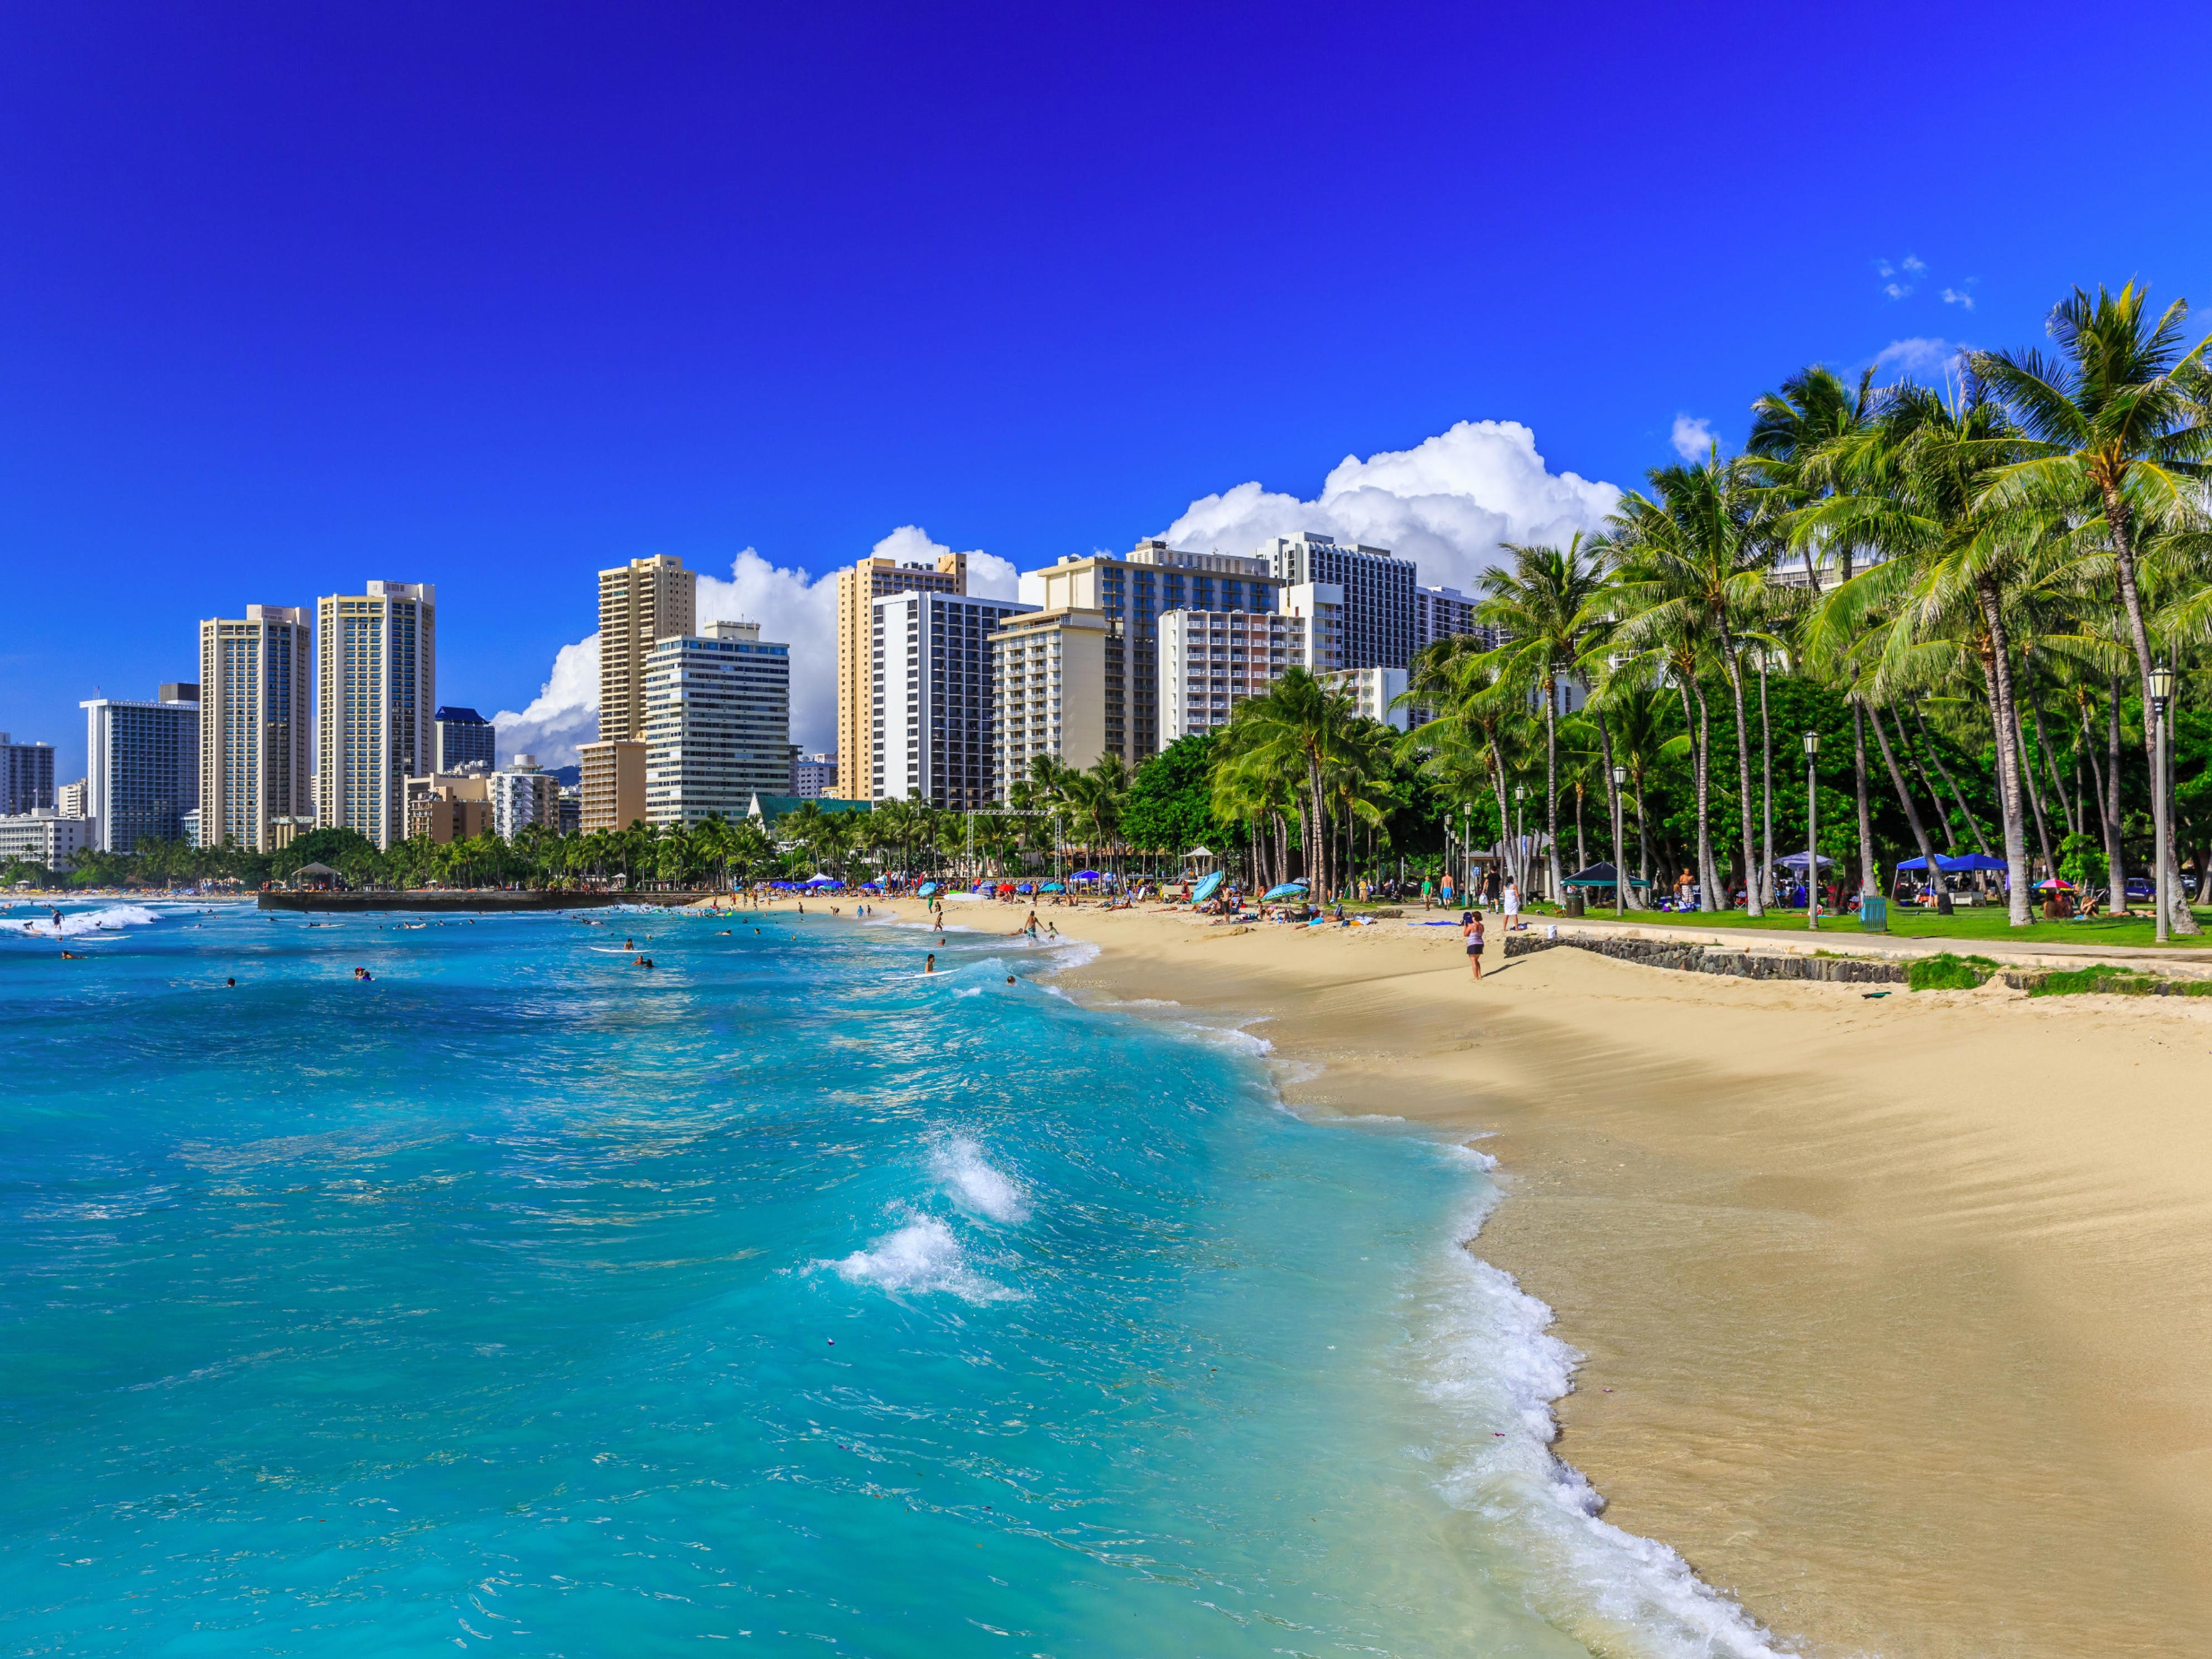 <p><a href="https://www.insider.com/hawaii-best-and-worst-parts-about-living-there-full-time">Hawaii</a> ranked as the 17th best state for personal and residential safety. It came in 13th place in the financial safety category, and 12th in both workplace safety and emergency preparedness.</p><p>The Aloha State has the fifth-fewest fatalities per 100 million vehicle miles of travel, the second-lowest bullying incidence rate, and the second-lowest share of uninsured residents. In addition, it has the highest percentage of adults with rainy-day funds and the fifth-fewest fatal occupational injuries per total workers.</p>